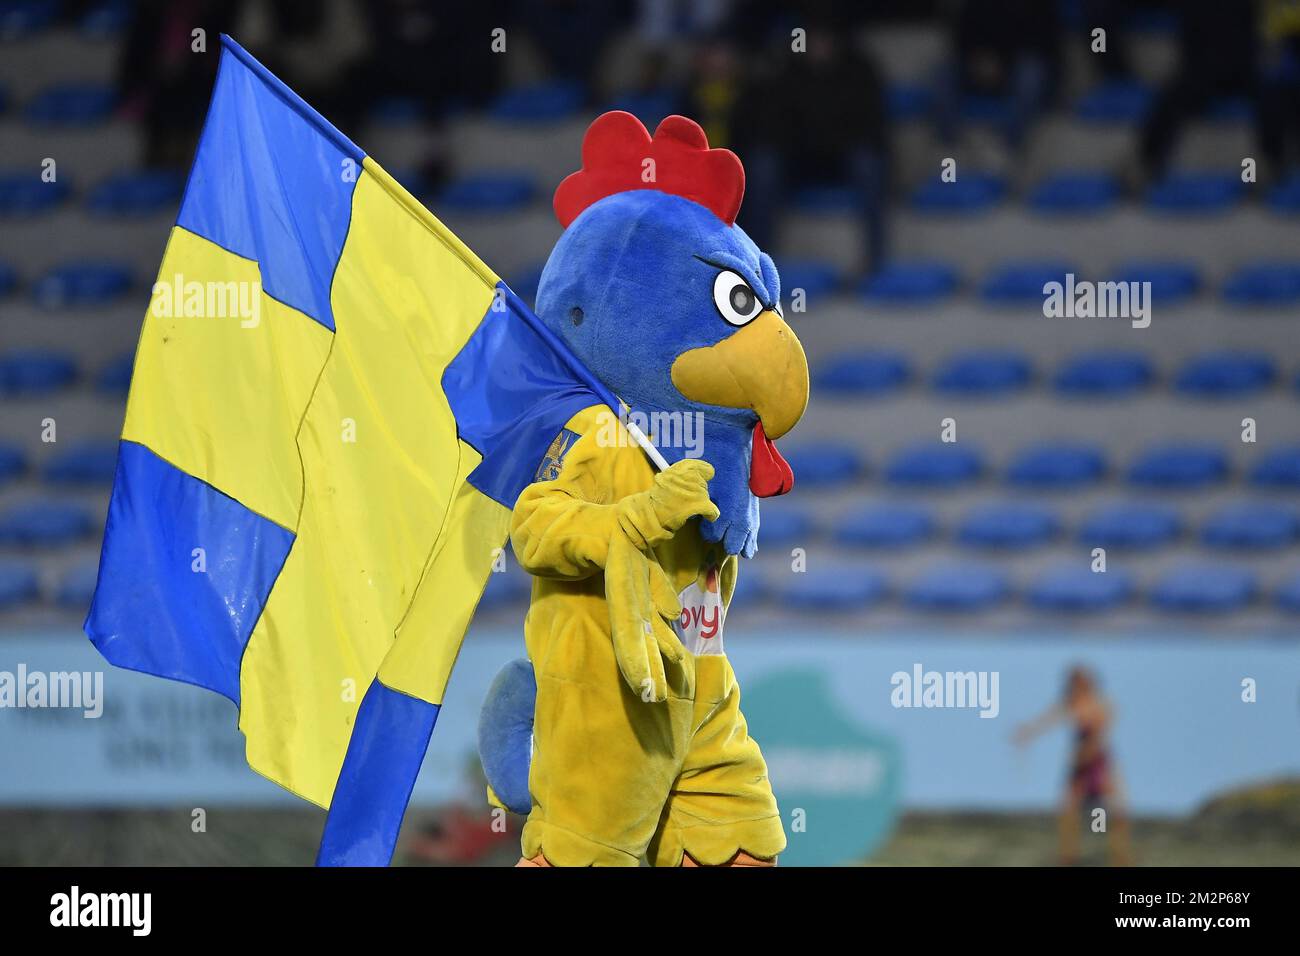 Westerlo's mascot 'Kemphaan' pictured before a soccer game between KVC Westerlo and Union Saint-Gilloise, Saturday 26 January 2019 in Westerlo, on the 23rd day of the 'Proximus League' 1B division of the Belgian soccer championship. BELGA PHOTO JOHAN EYCKENS Stock Photo